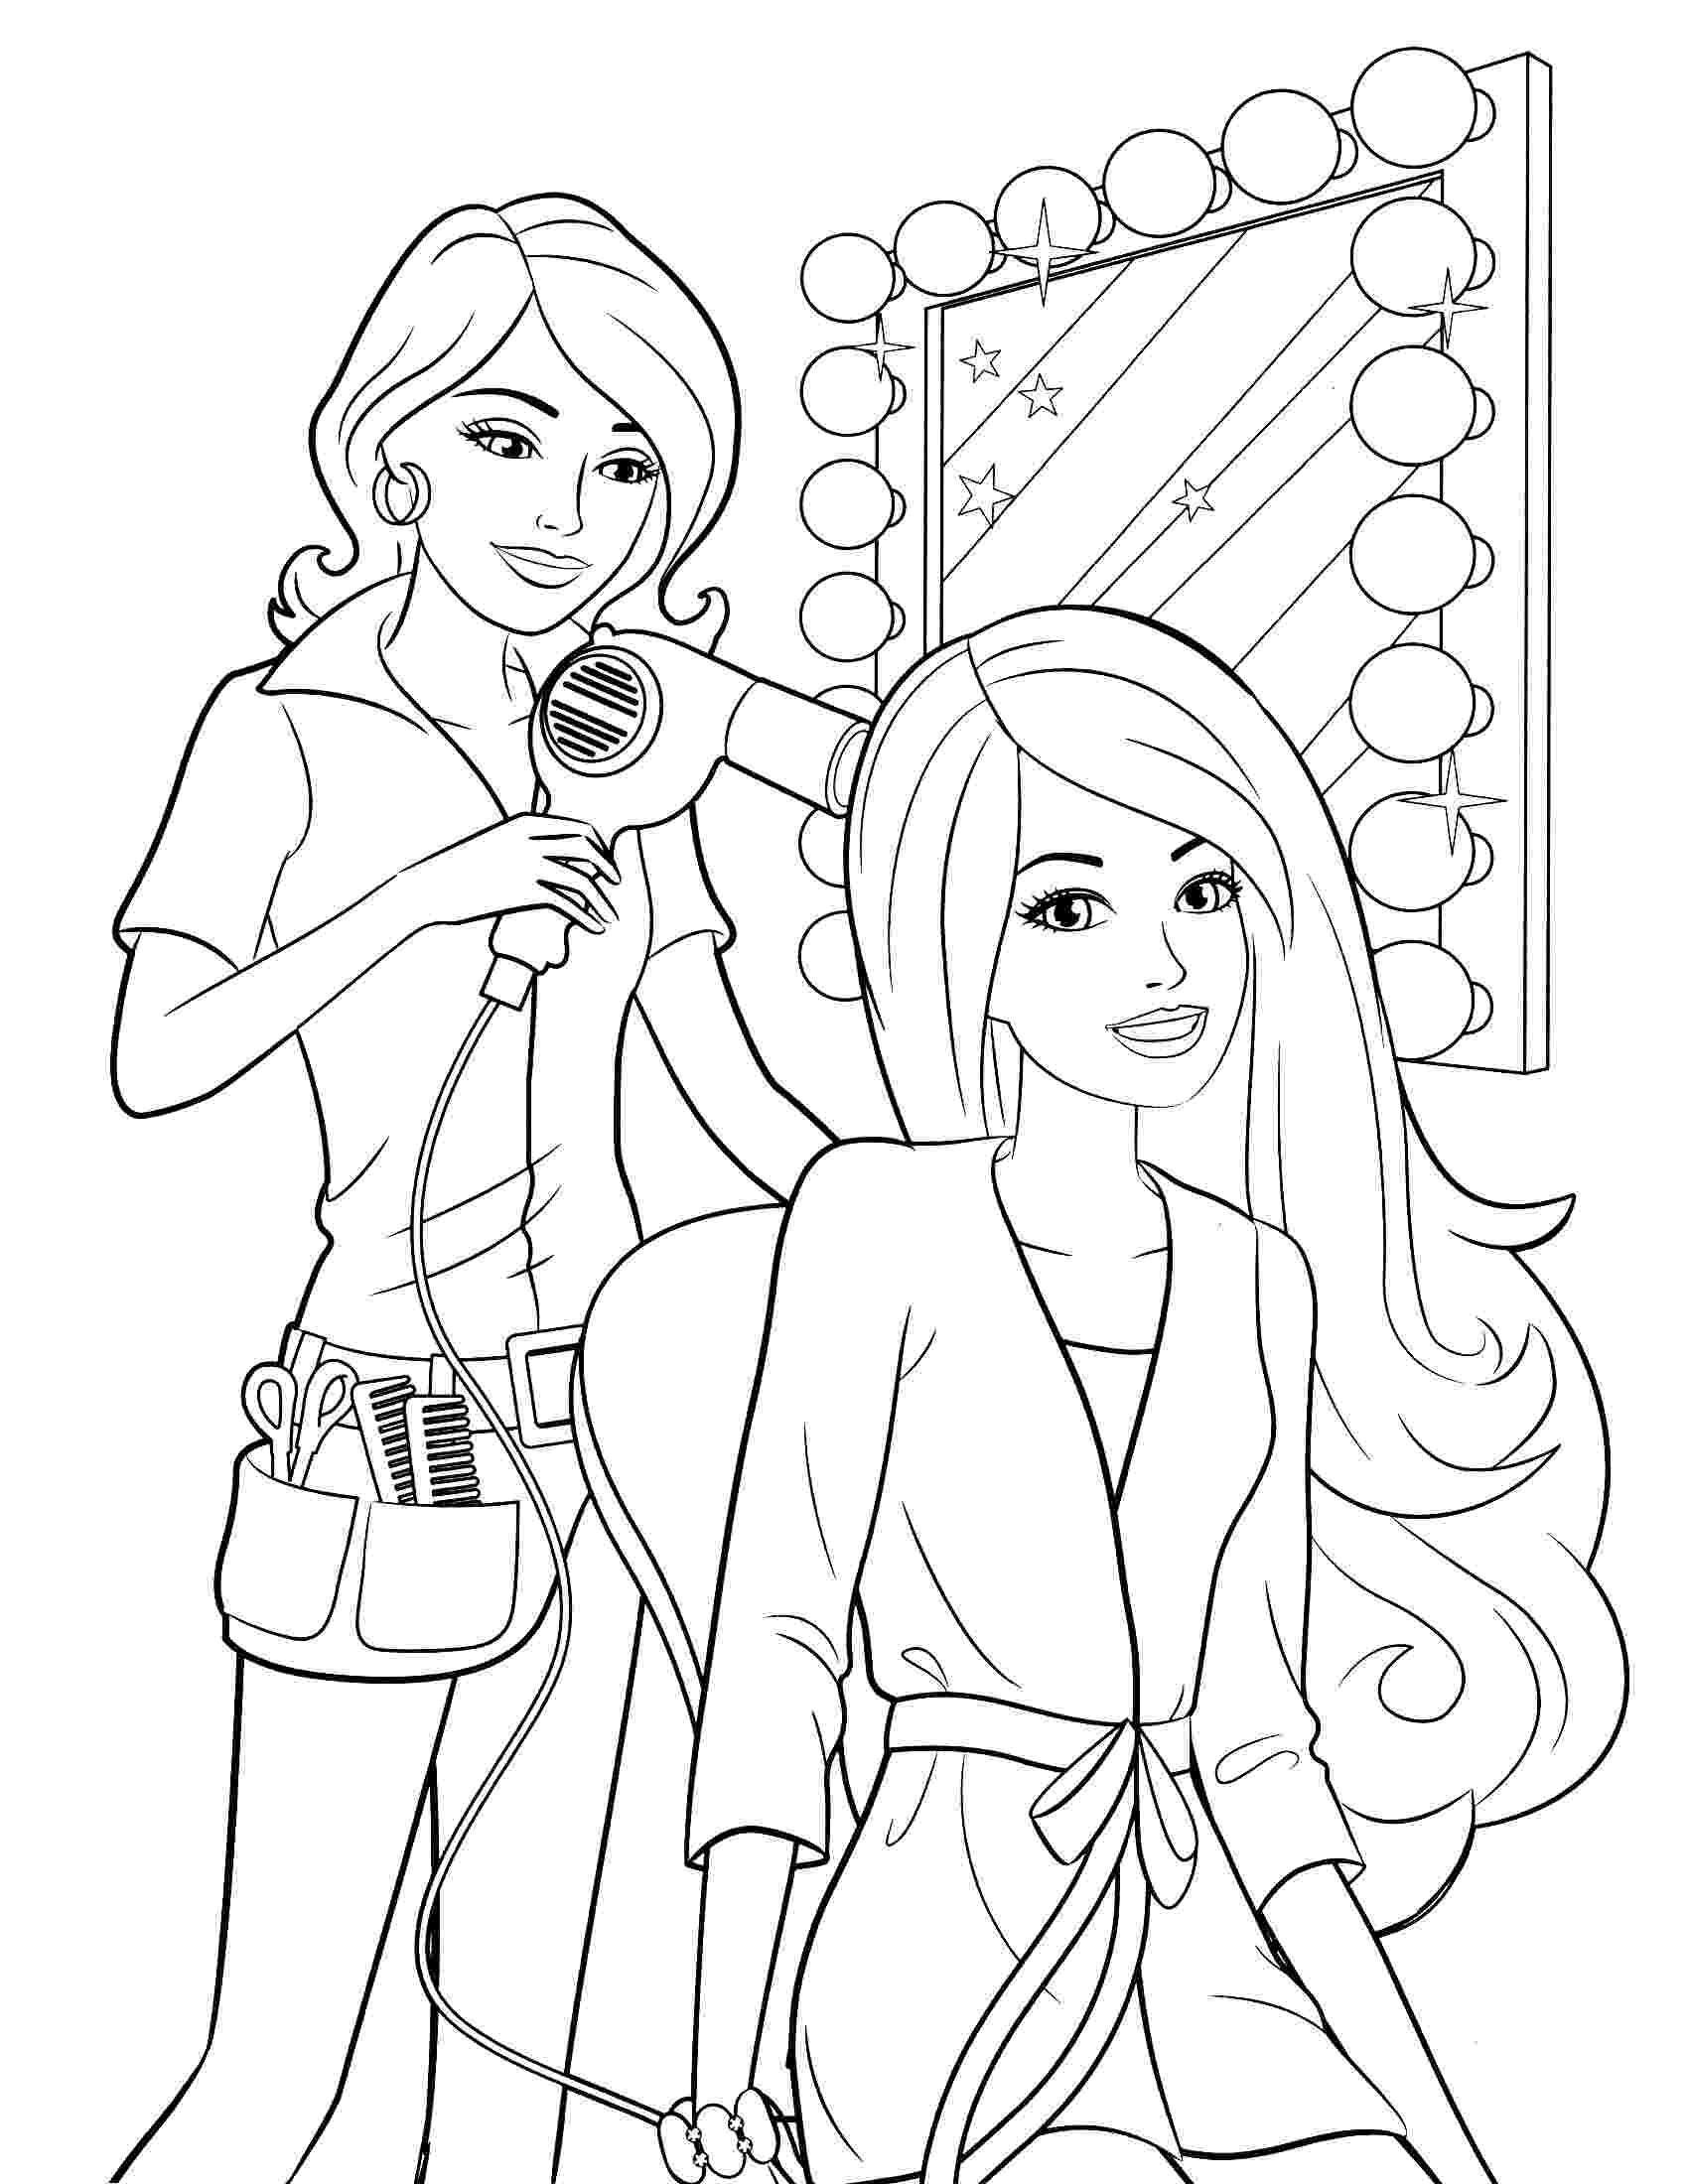 girls coloring pictures coloring pages for girls best coloring pages for kids coloring girls pictures 